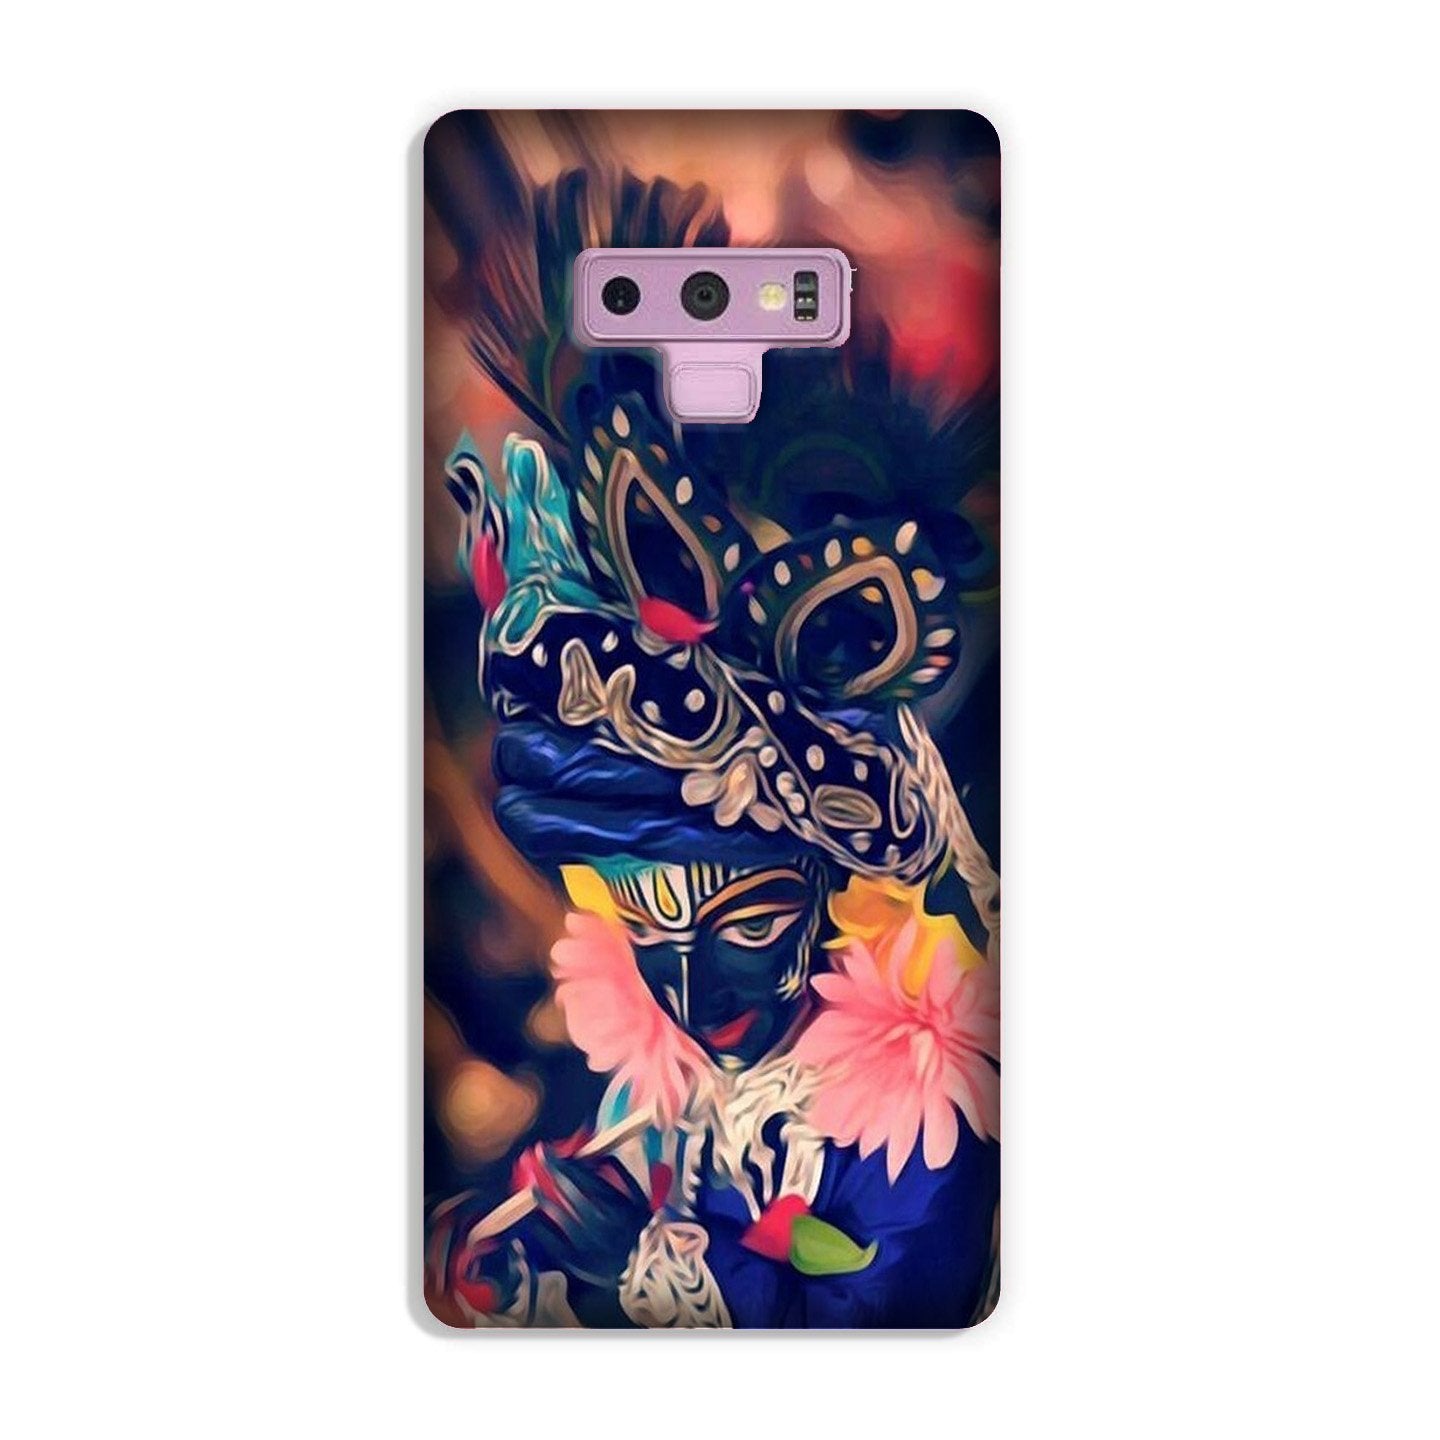 Lord Krishna Case for Galaxy Note 9